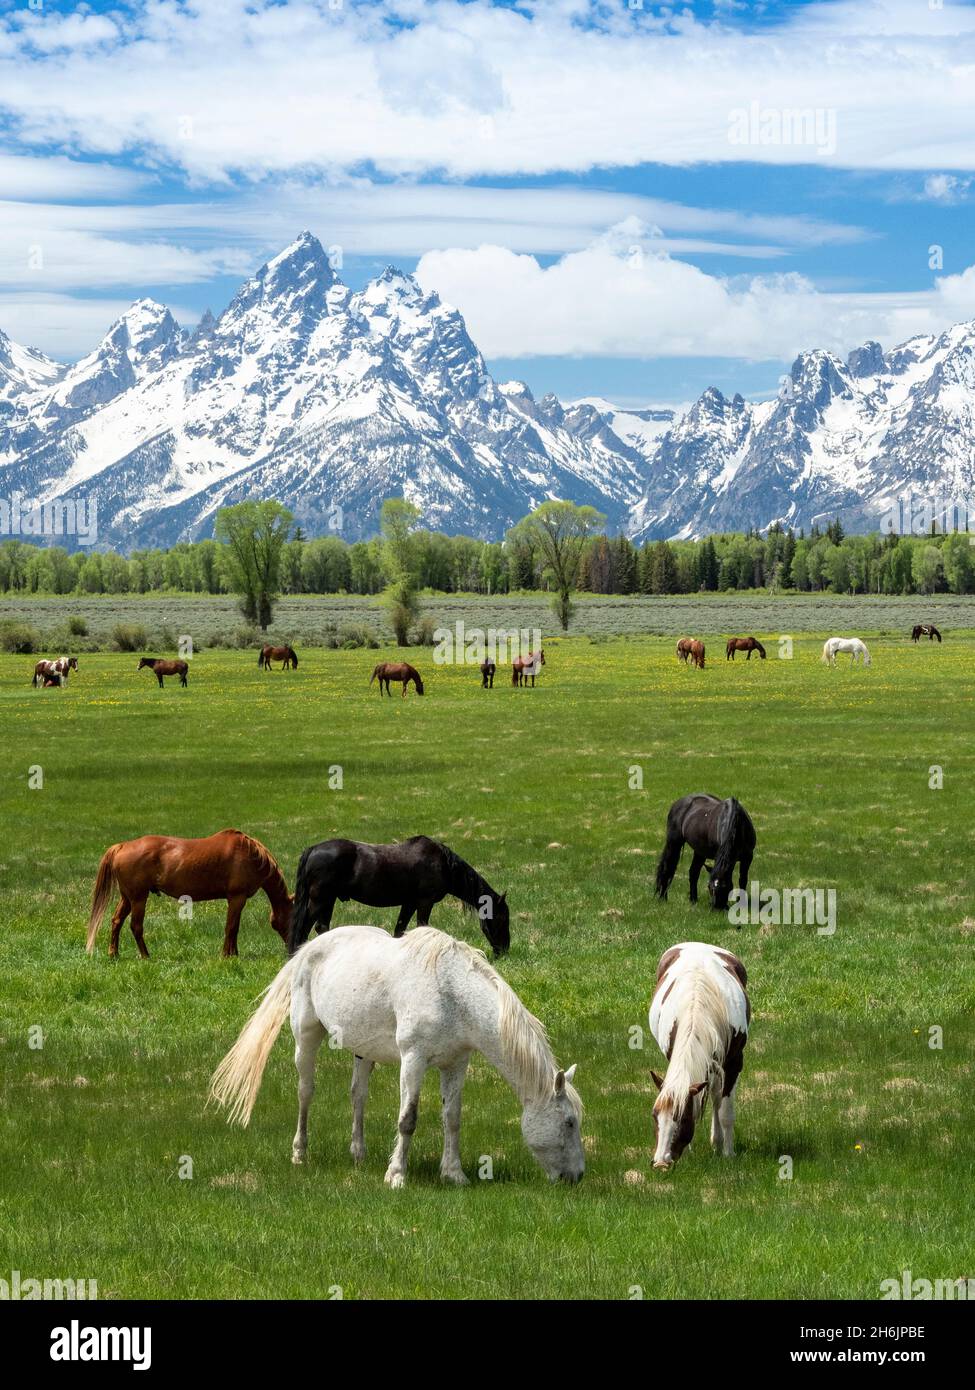 Adult horses (Equus ferus caballus) grazing at the foot of the Grand Teton Mountains, Wyoming, United States of America, North America Stock Photo